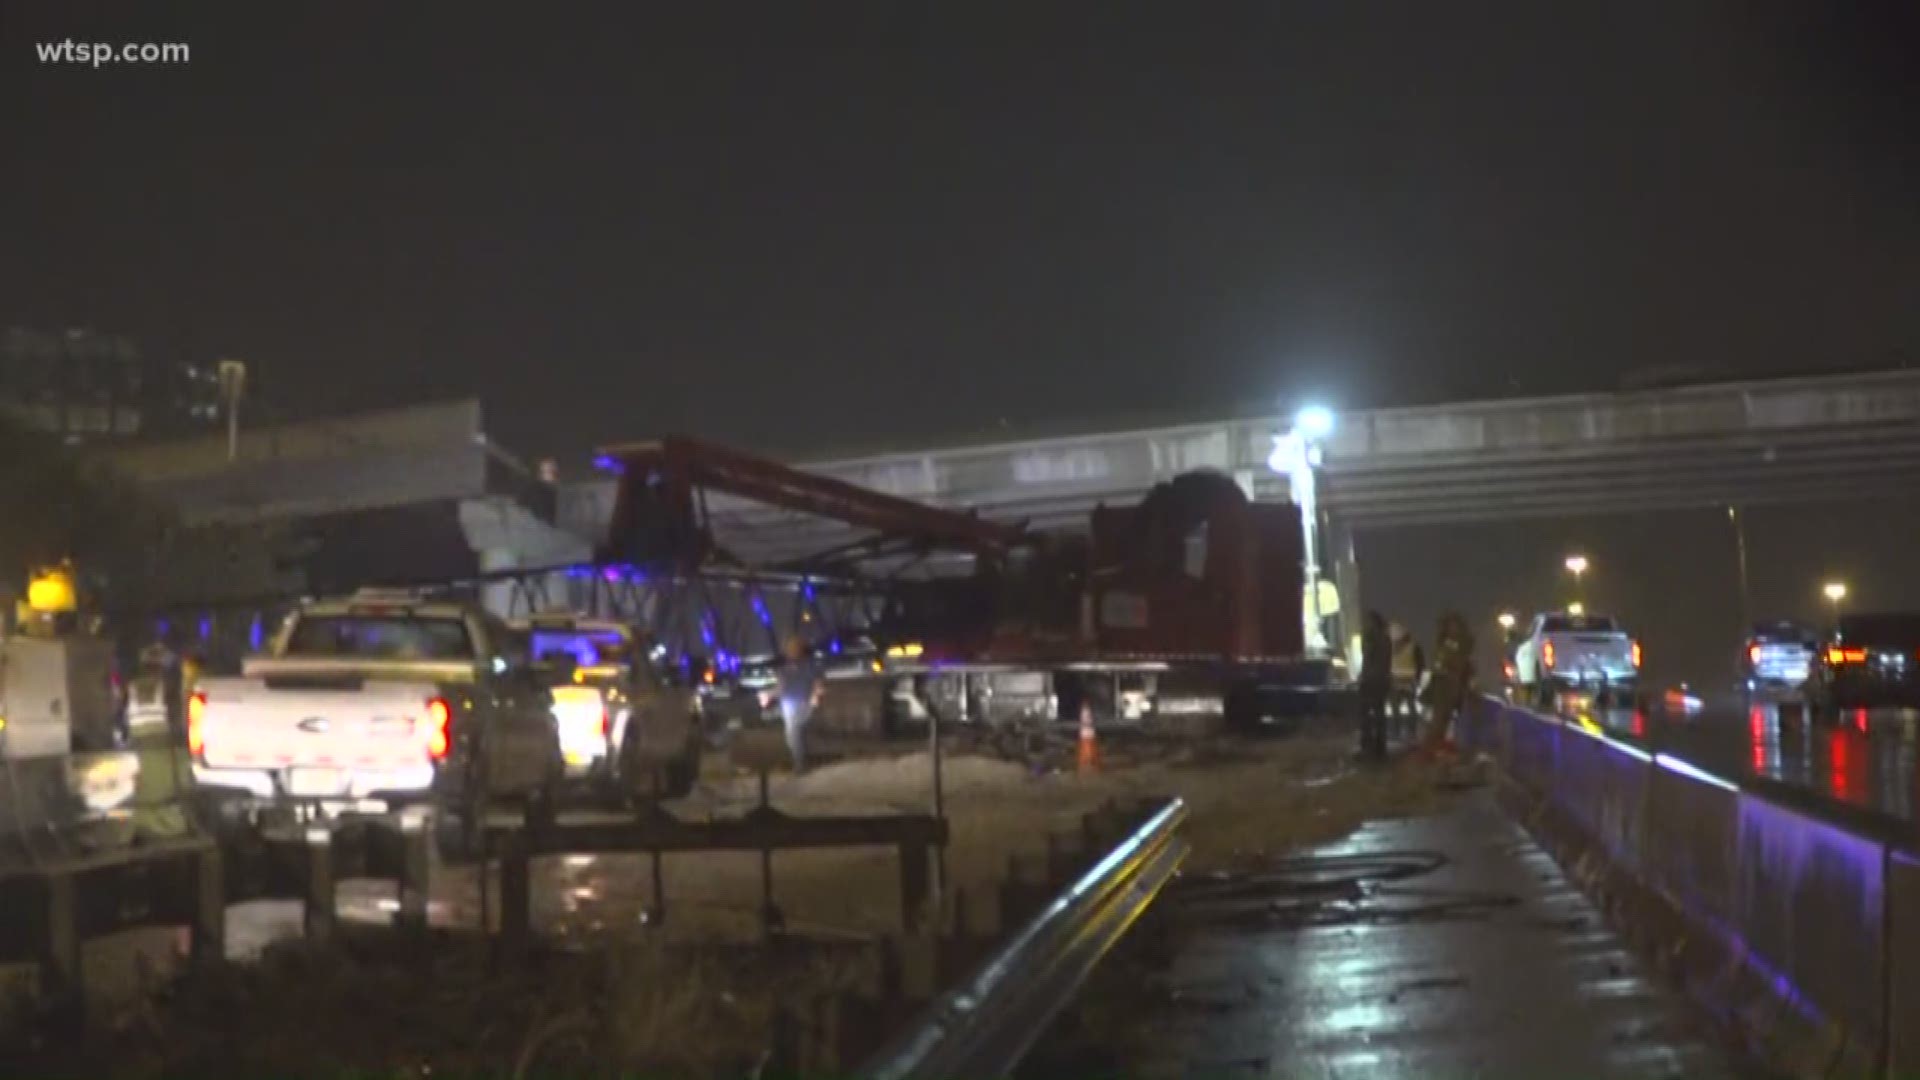 Severe storms caused a crane to fall, shutting down part of northbound I-275 in St. Petersburg, not far from Roosevelt Boulevard.